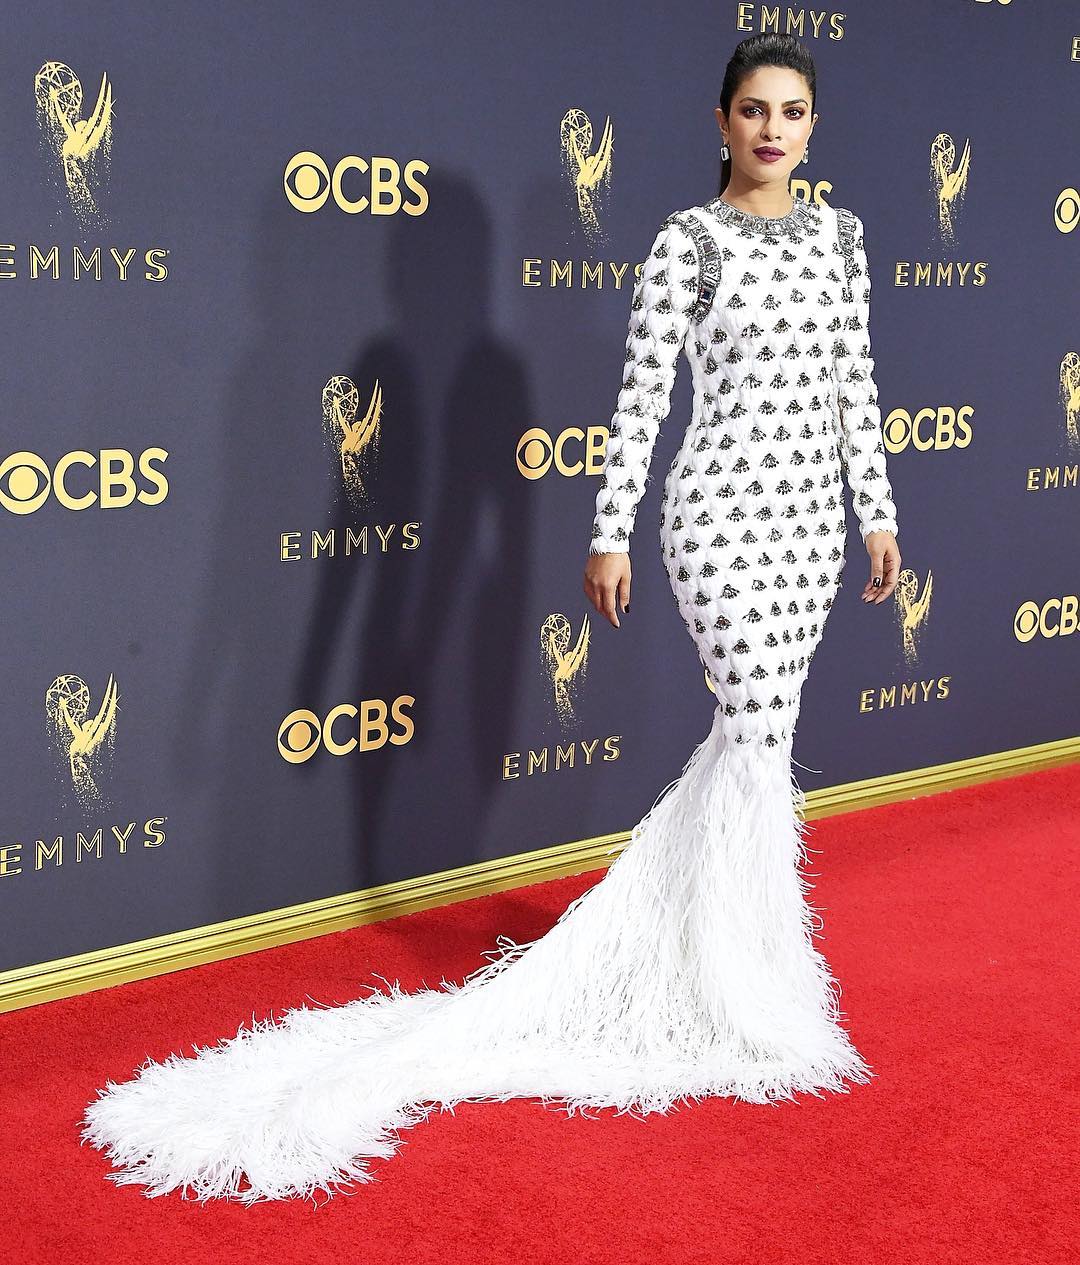 Priyanka Chopra wore a custom-made BALMAIN gown to attend the 2017 Emmys Awards in Los Angeles. 